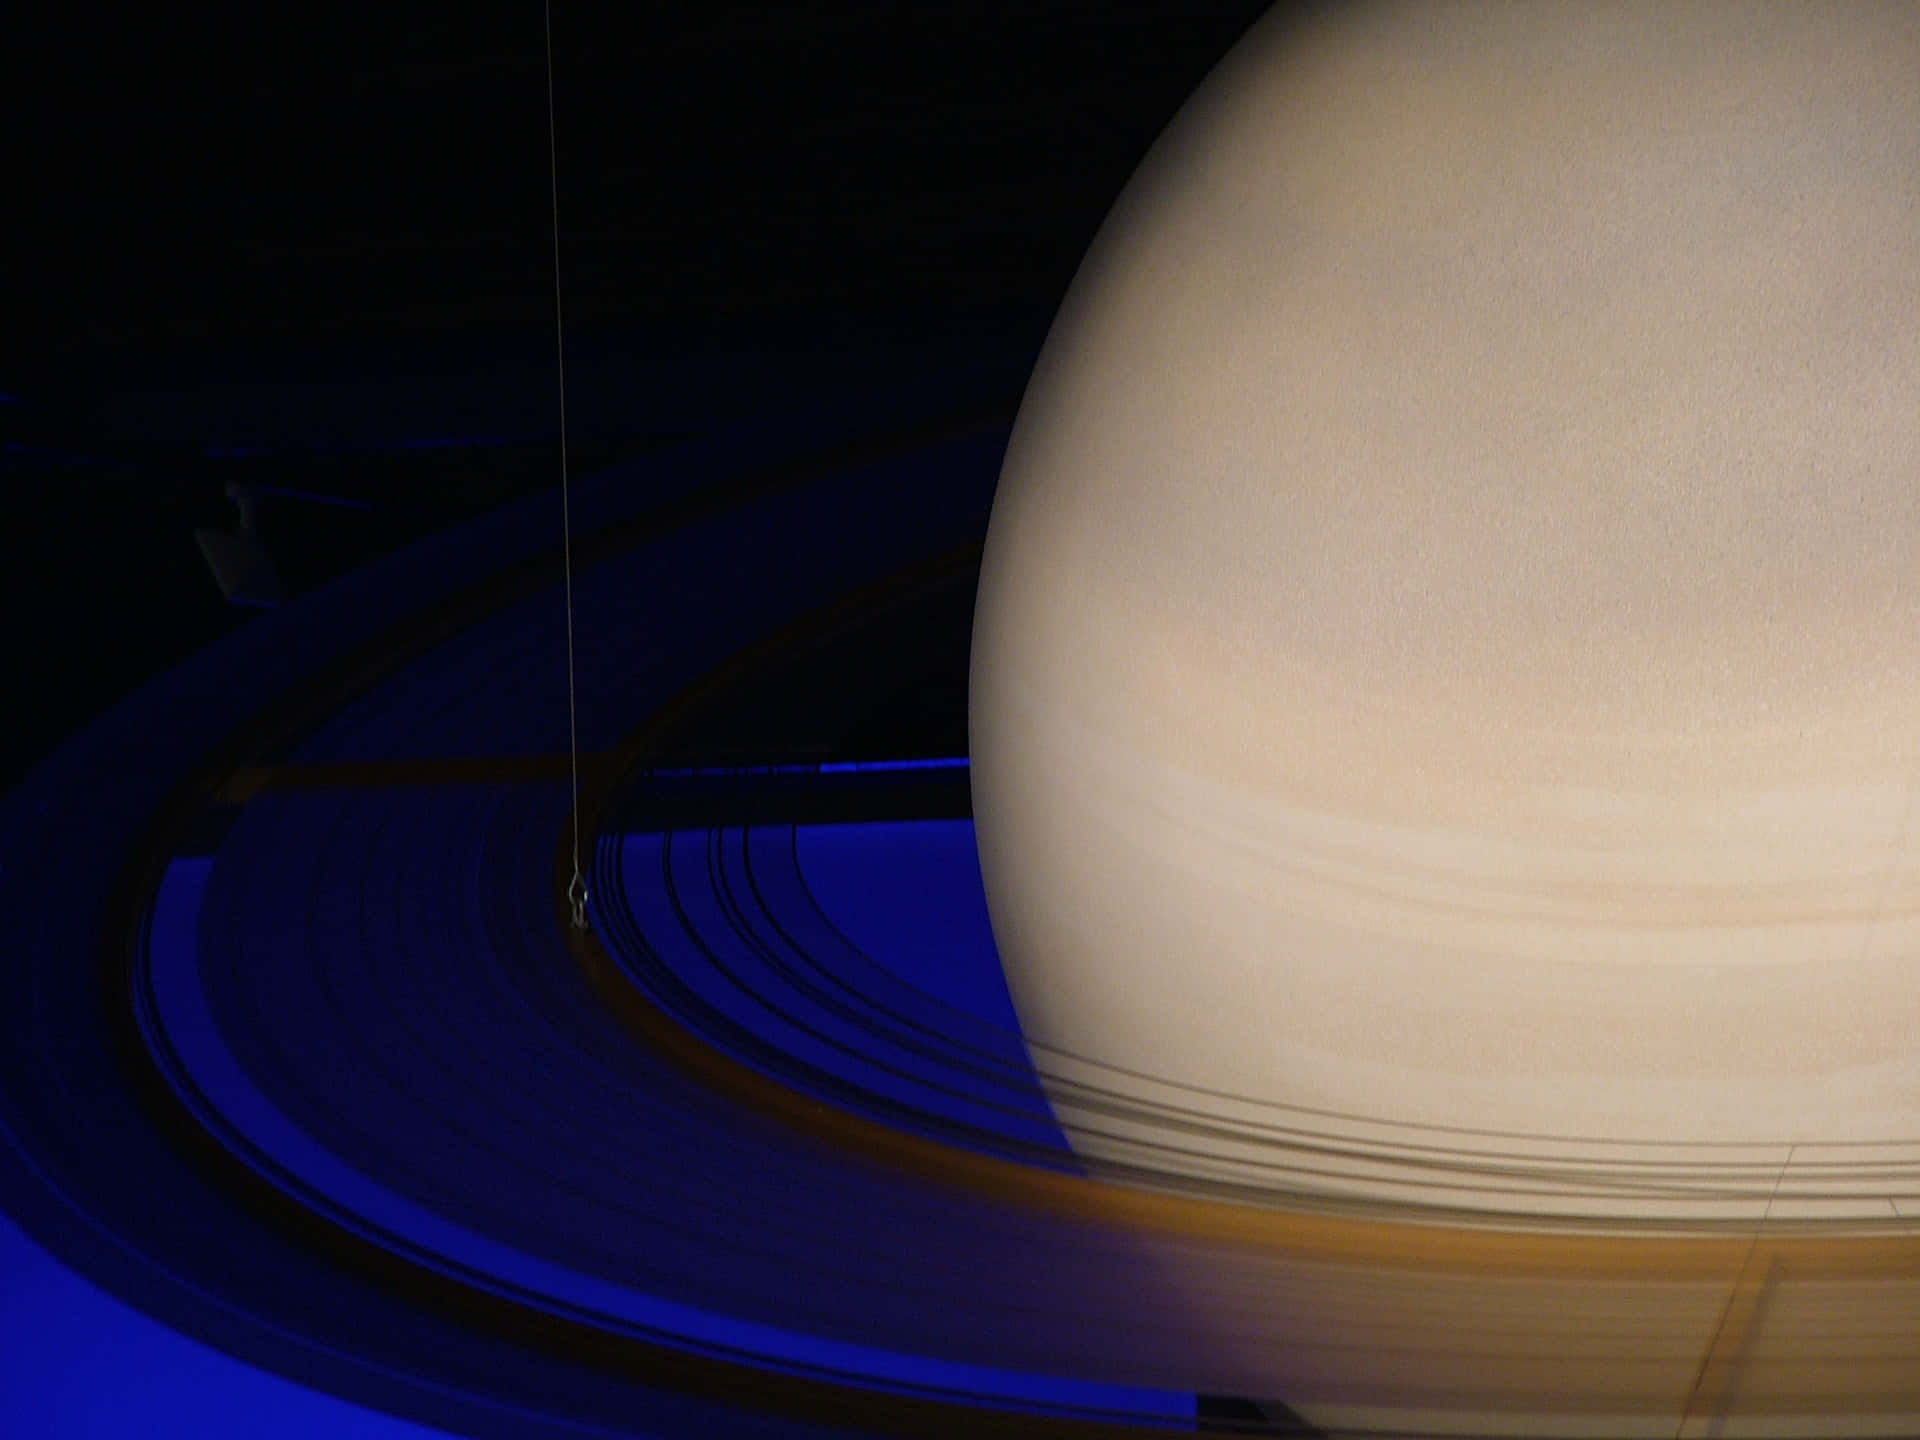 An Eerie Photo of Saturn